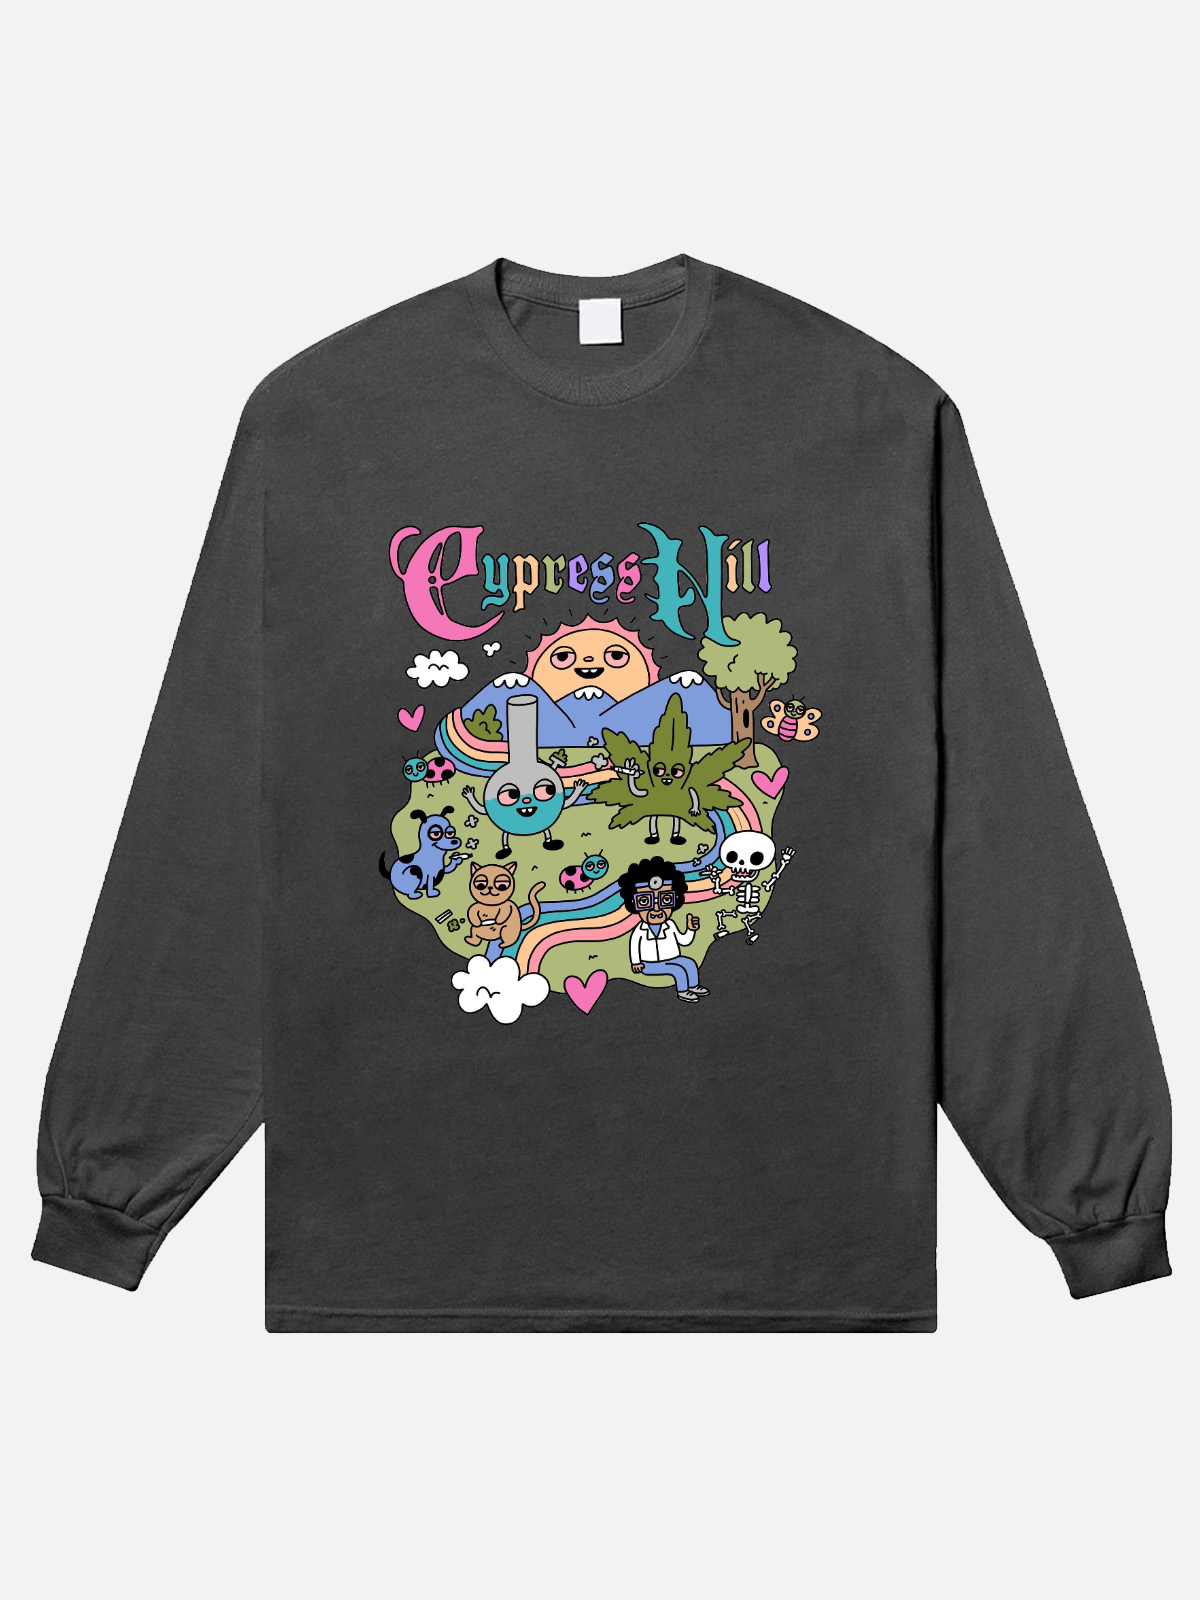 Cypress Hill - Happy Time Long Sleeve T-Shirt